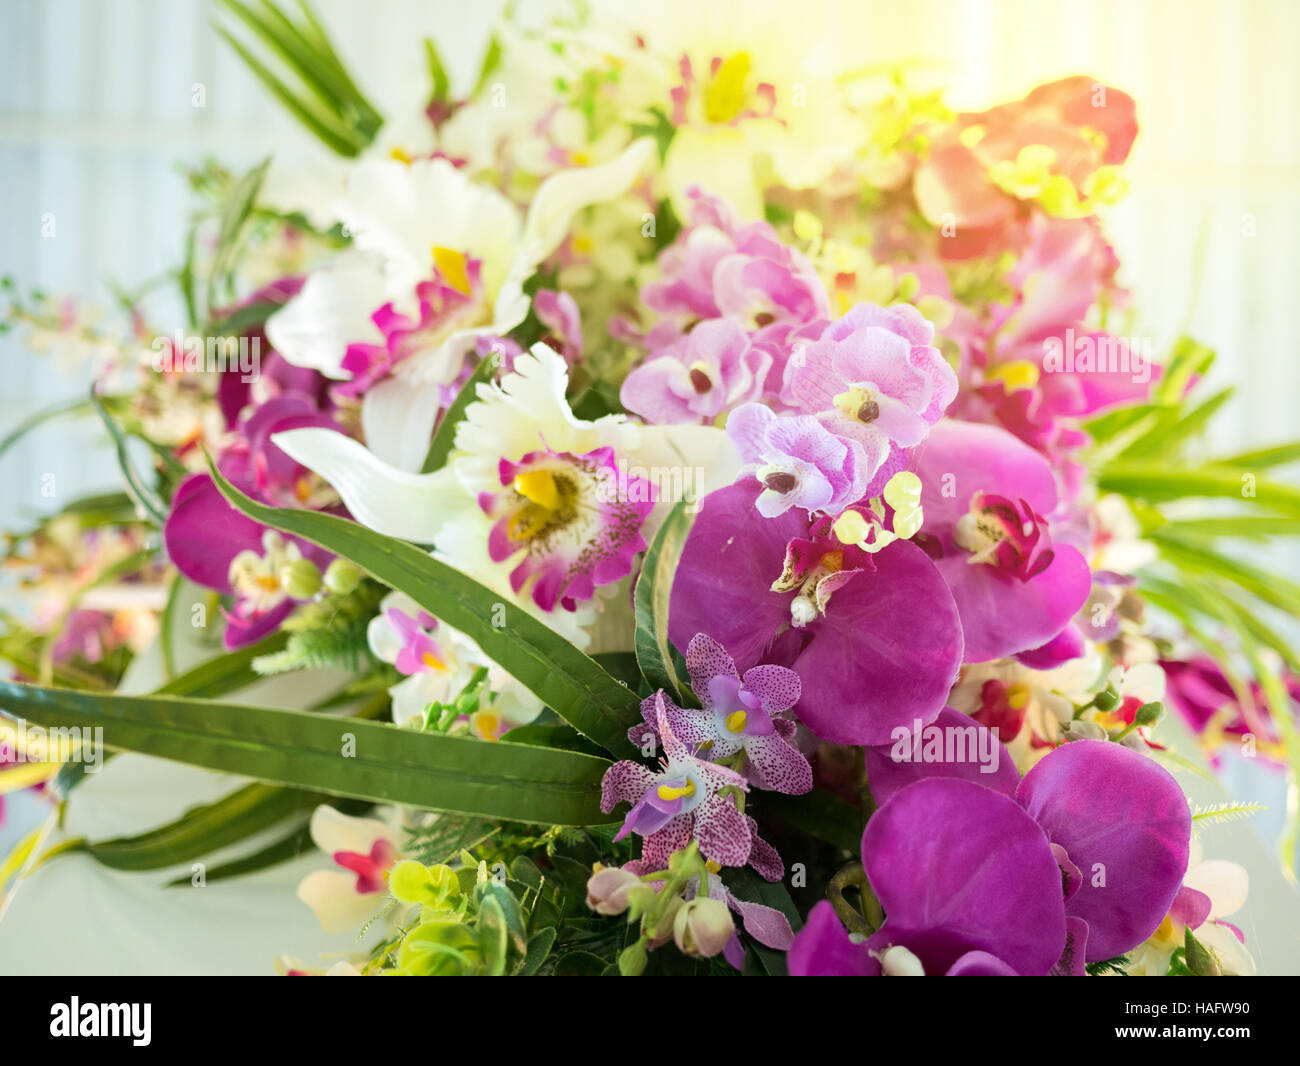 White and purple bouquet of flowers with sunlight Stock Photo